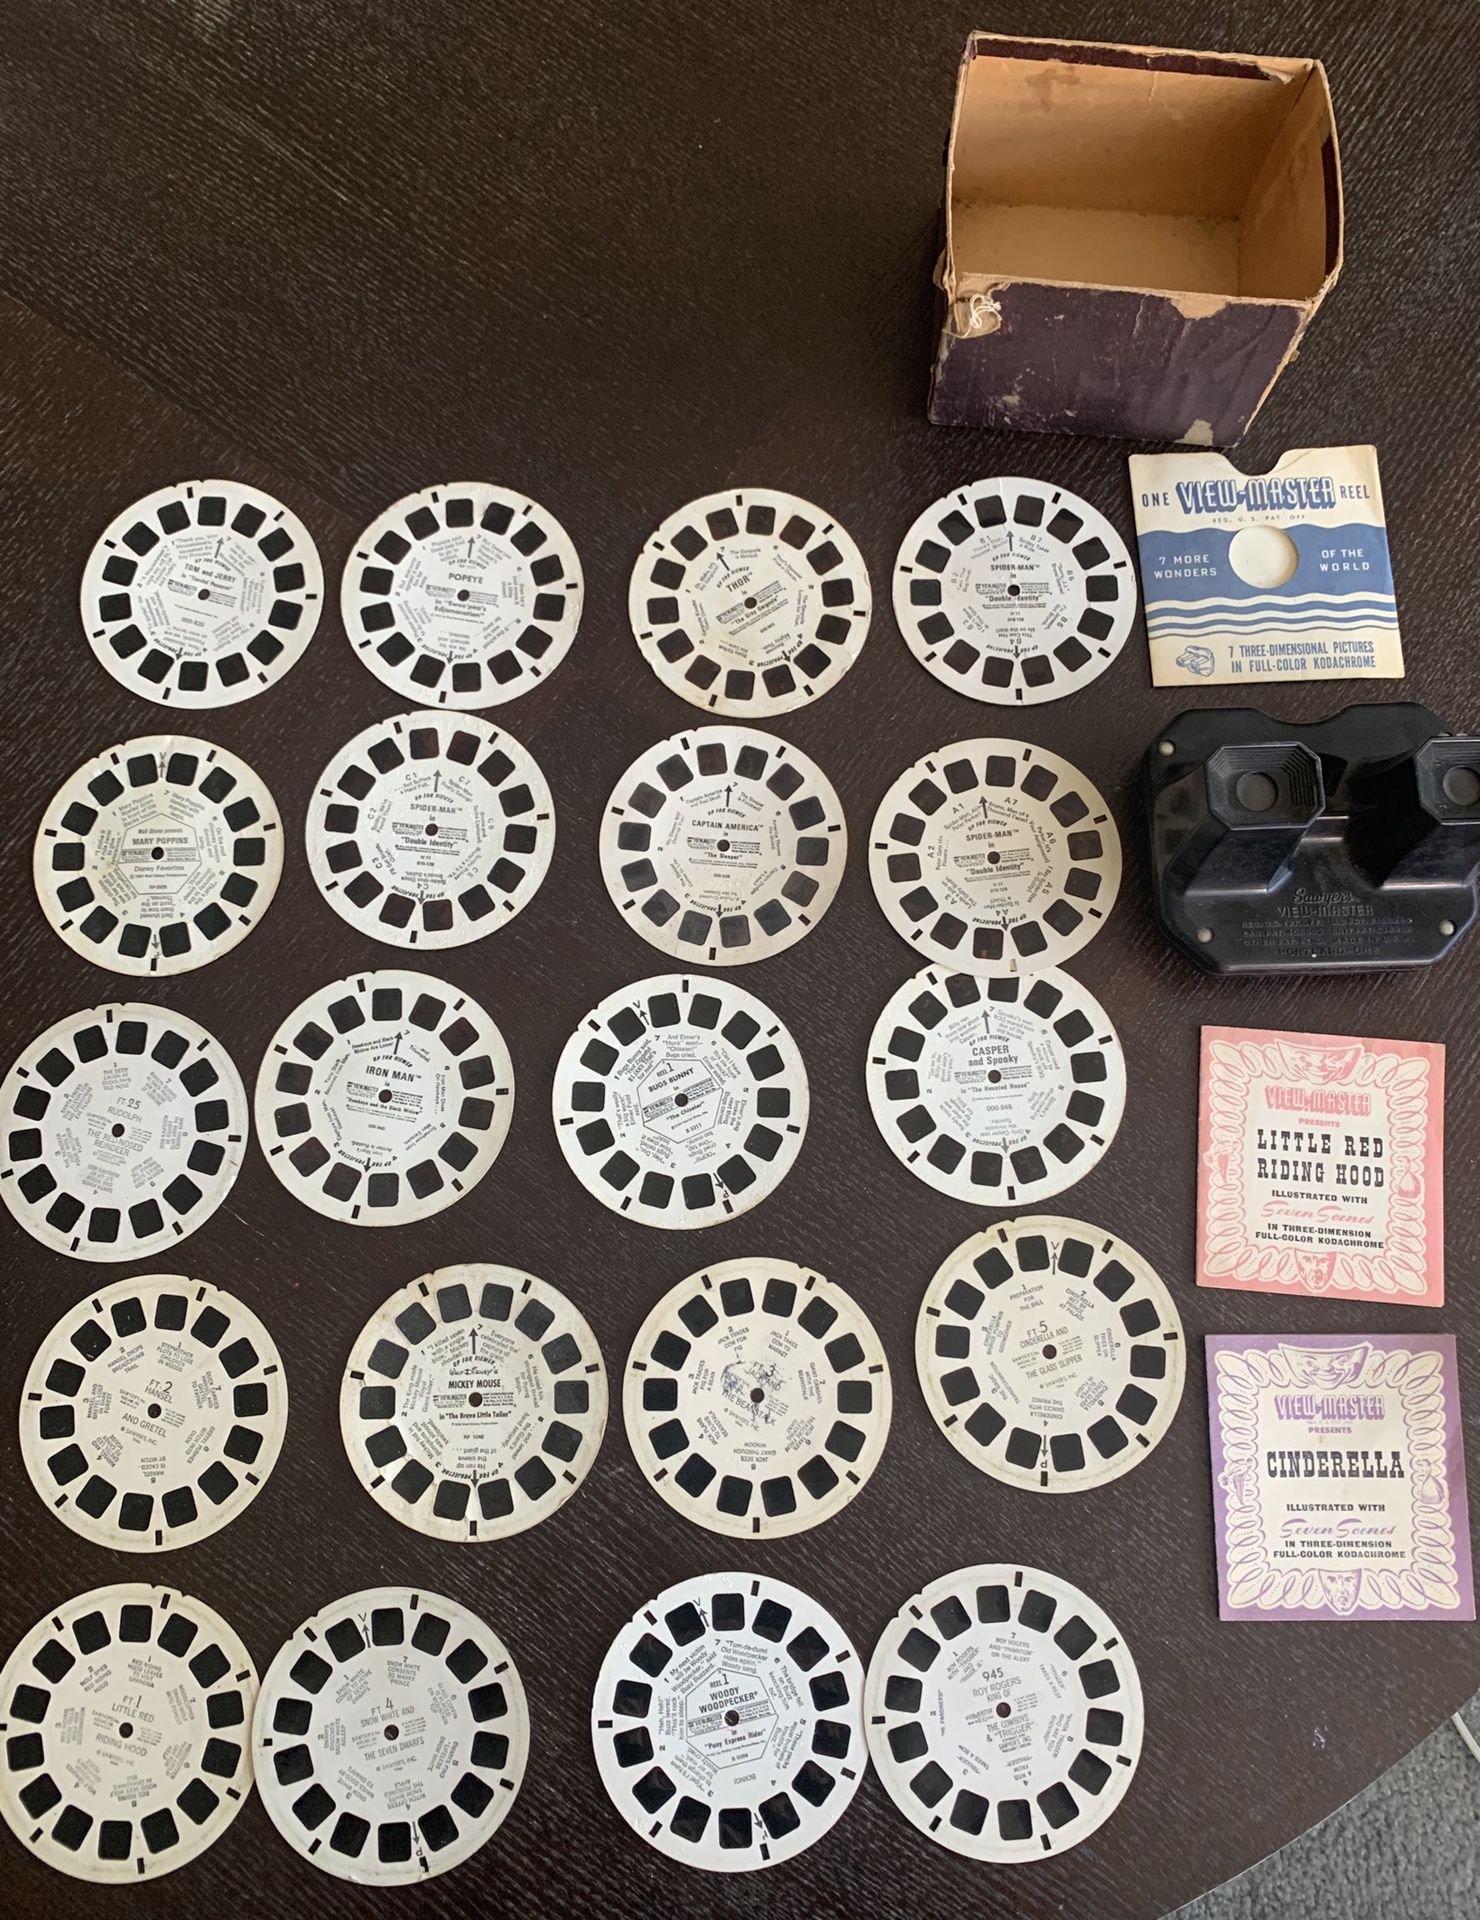 Vintage View-master with 20 reels, some rare 1946 excellent working condition